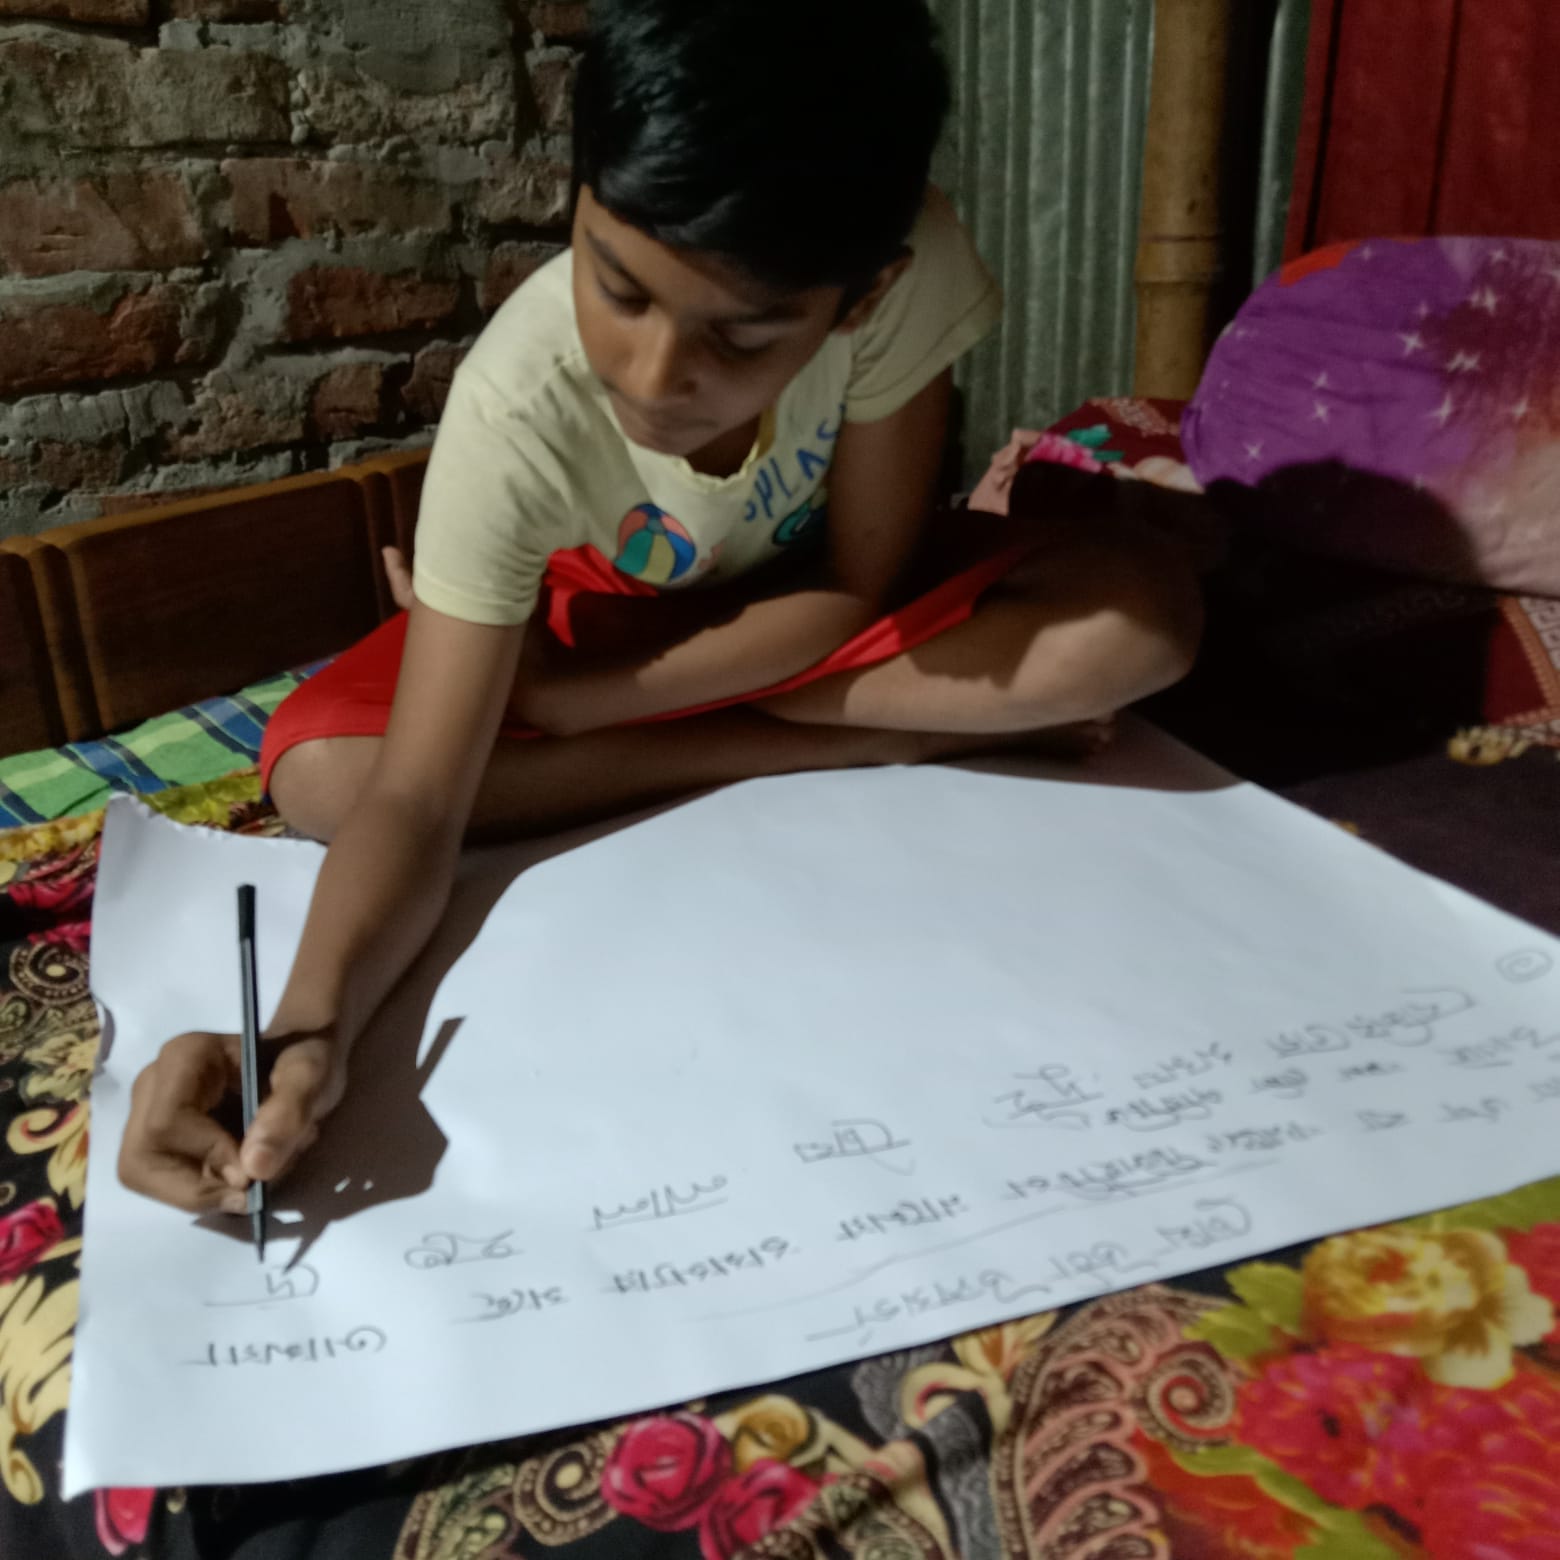 Jahid making a poster on conjunctivitis awareness